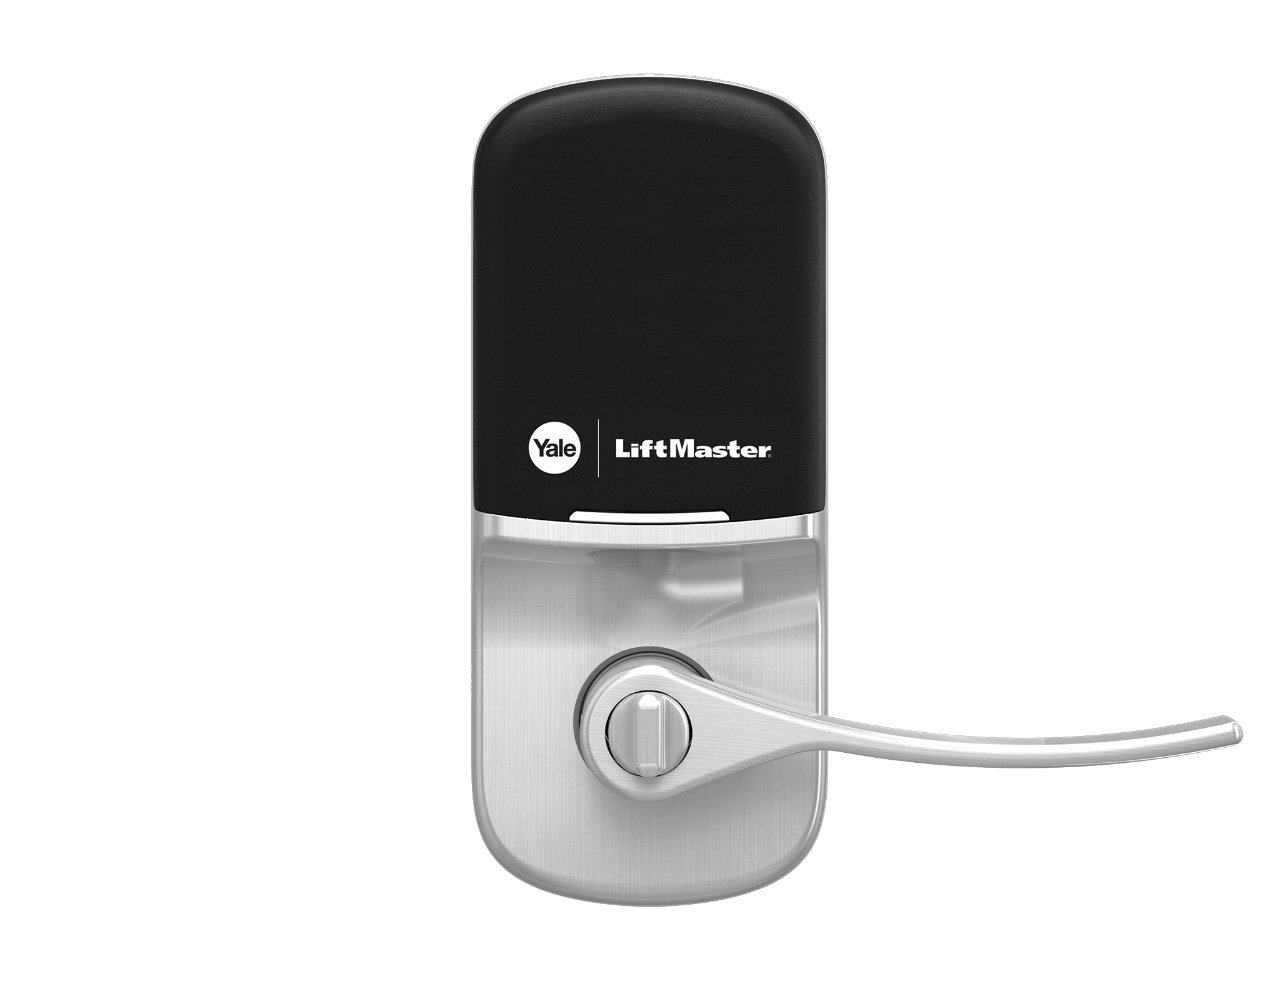 Scale the number of entry points you can monitor and control with LiftMaster's lineup of smart locks.